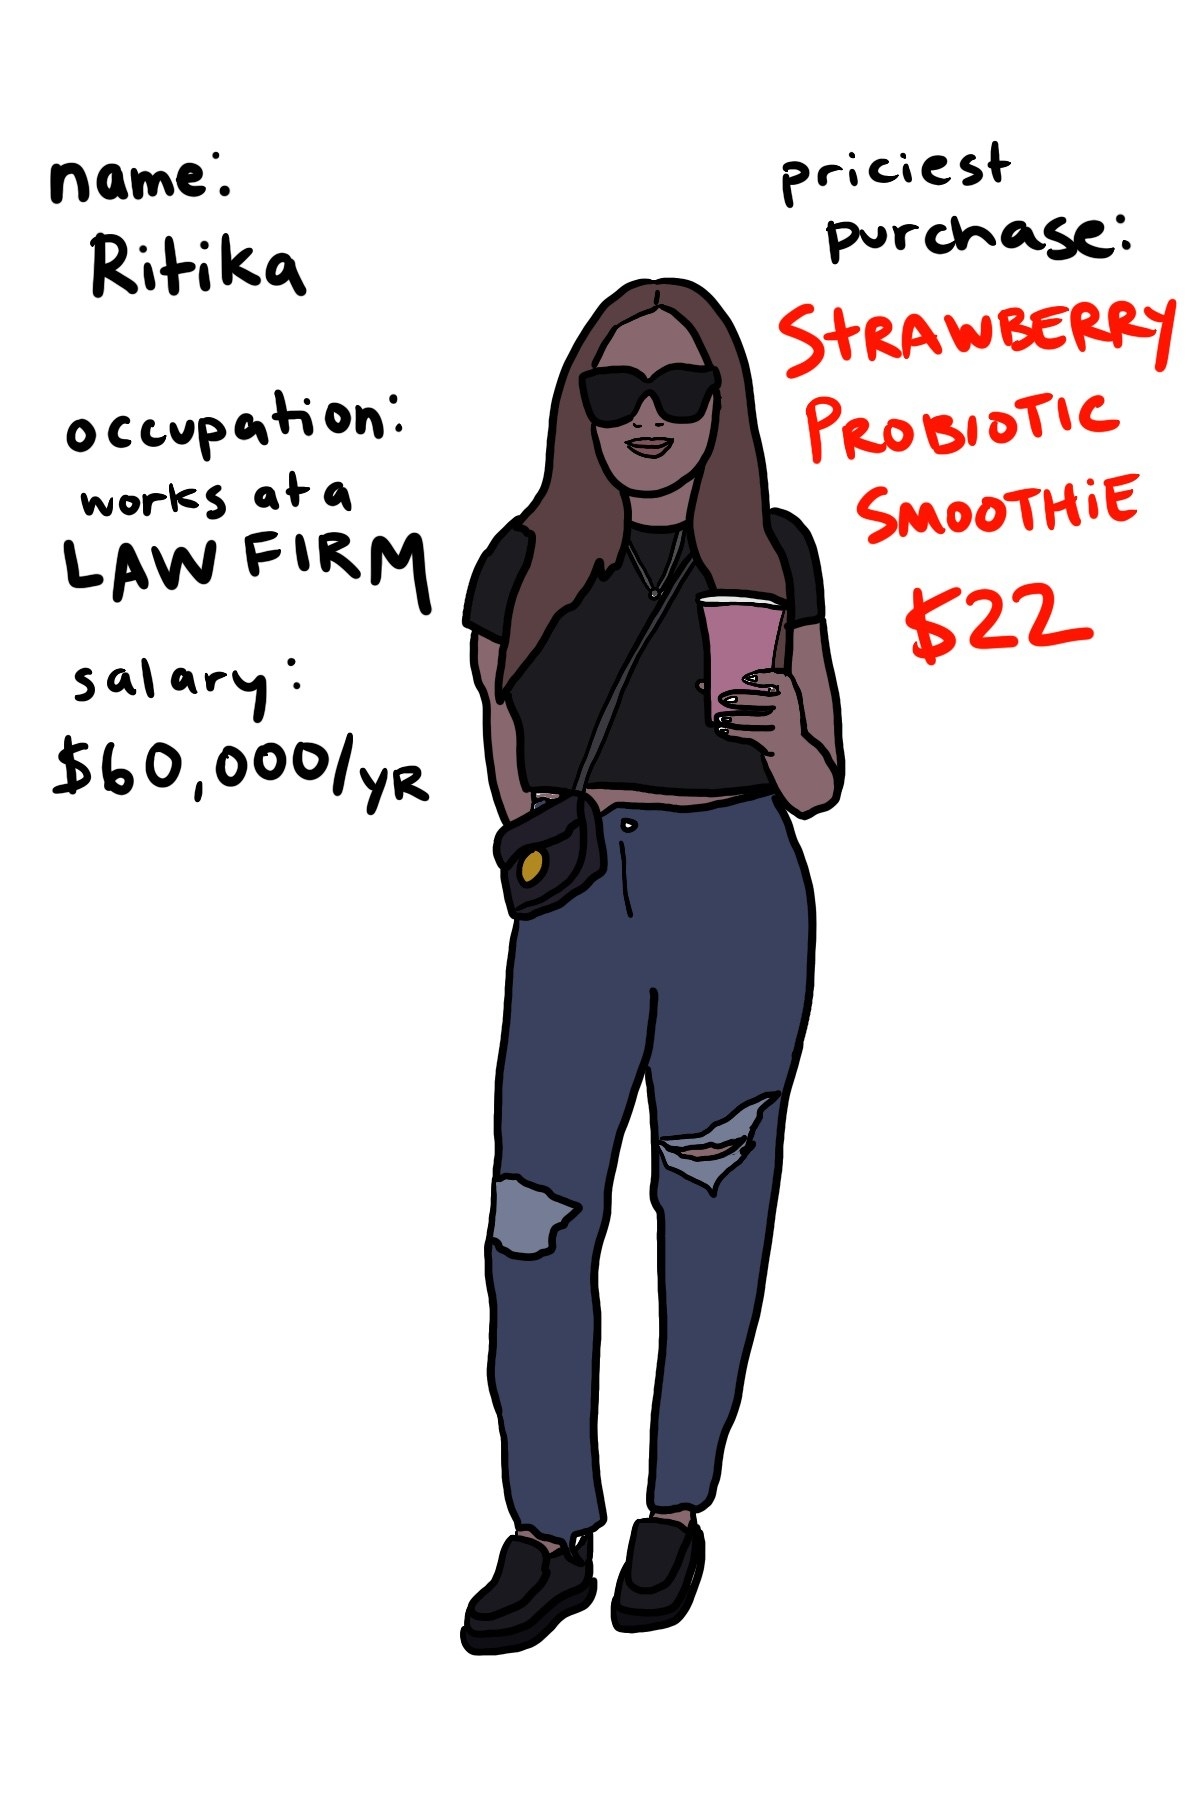 Customer who bought a strawberry smoothie for $22, works in a law firm, and earns $60k a year